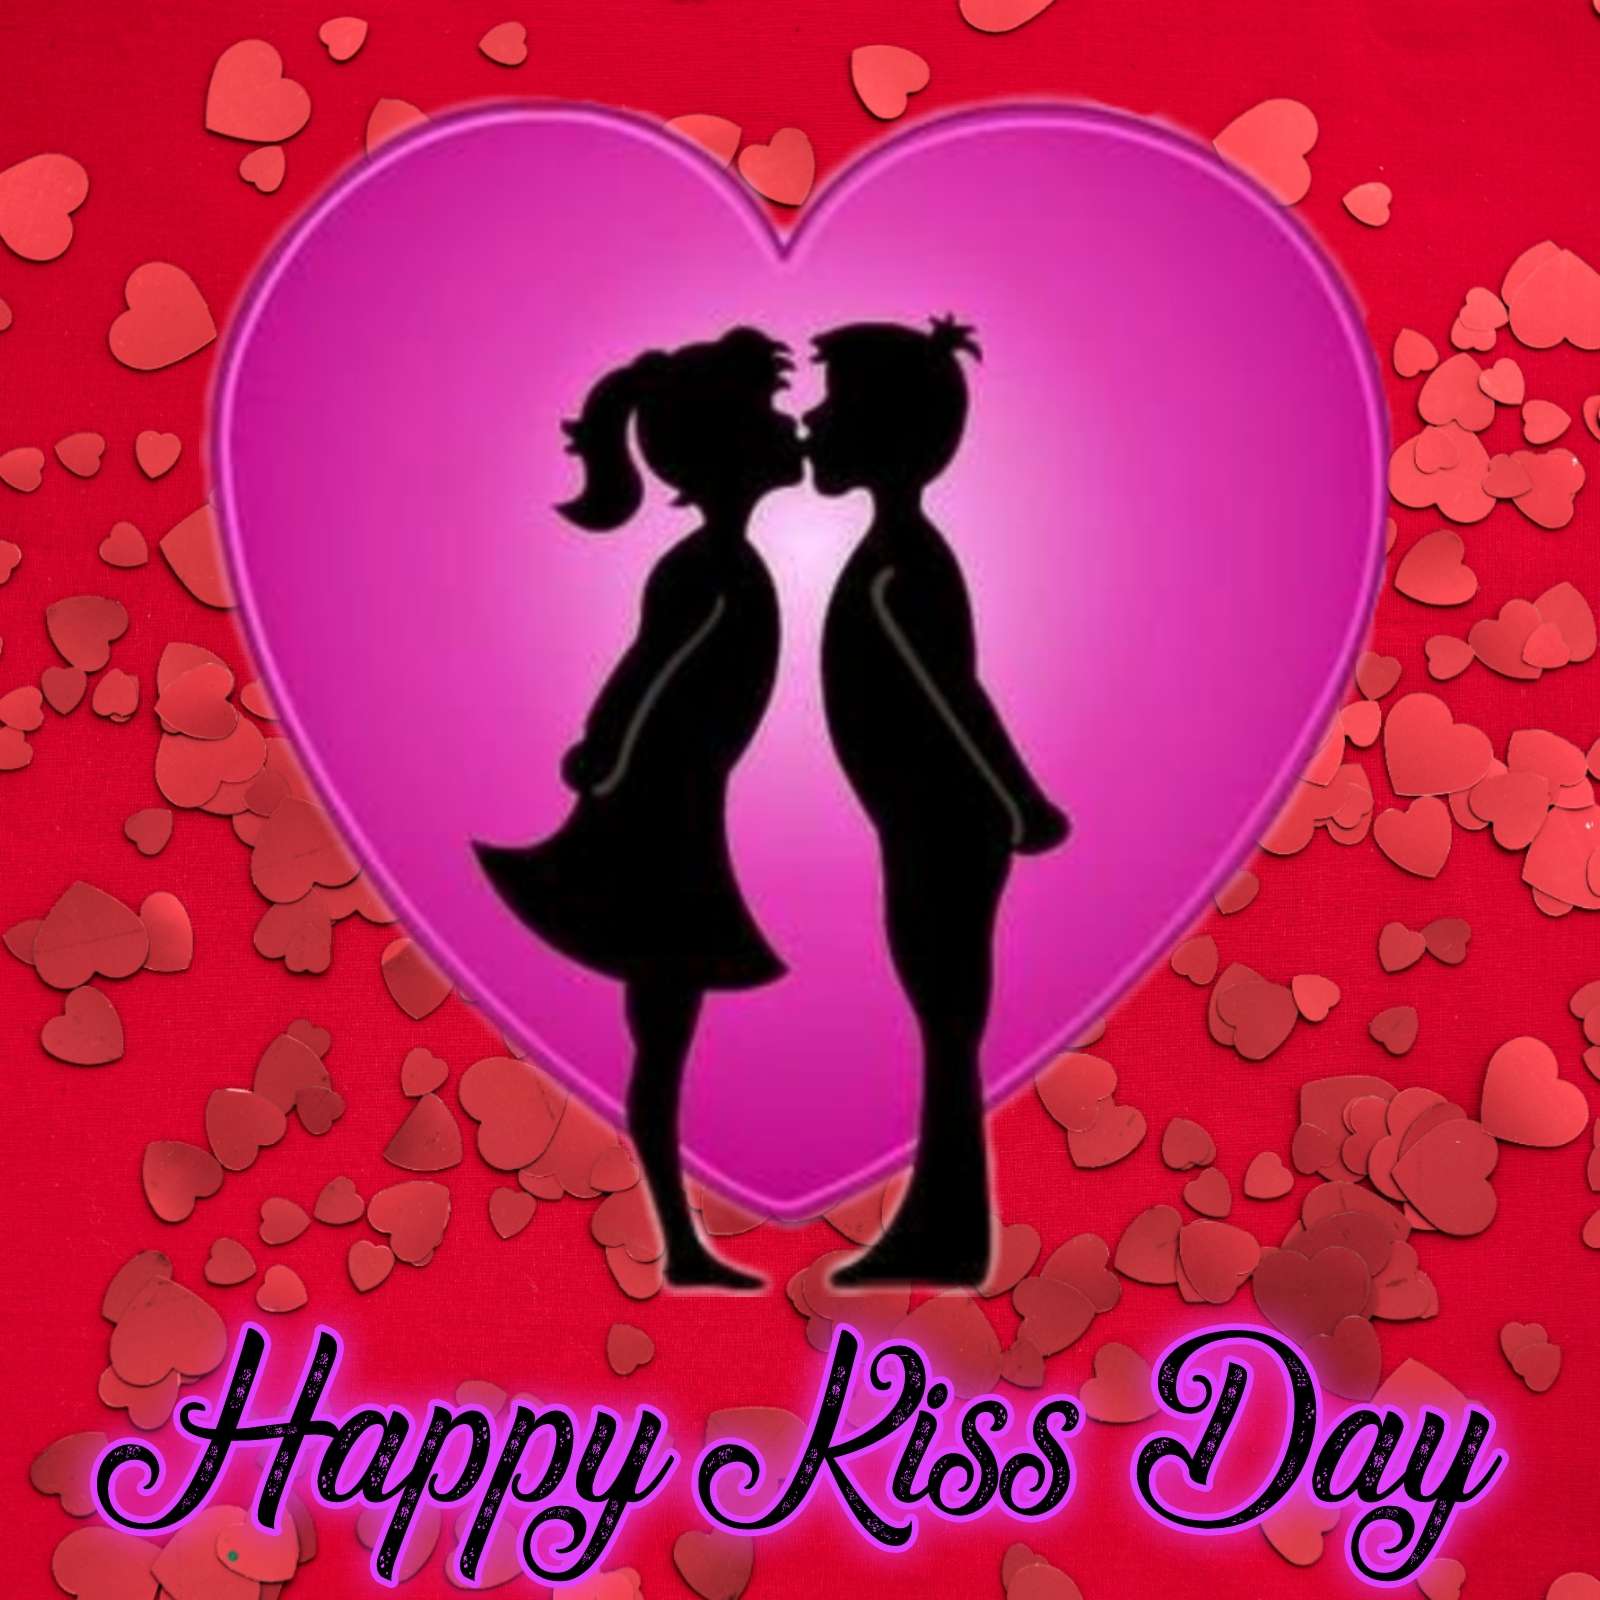 Love Kiss Day Images Download